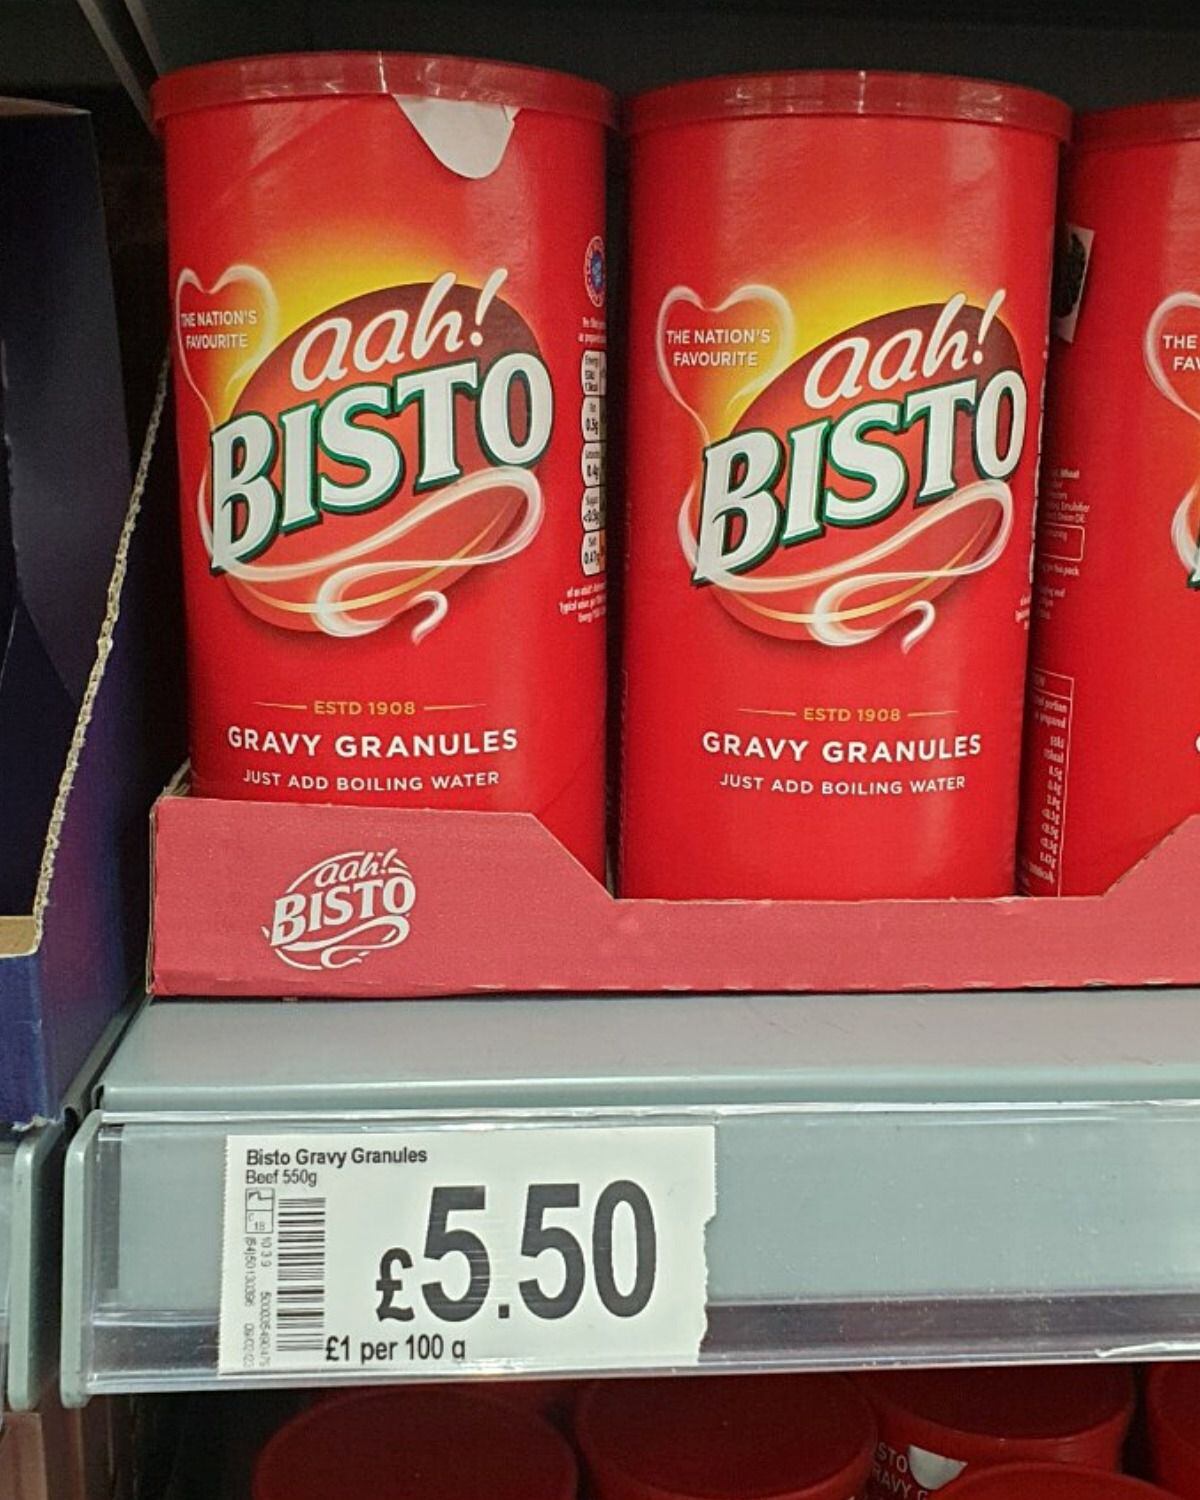 In Asda, a 550g pot of Bisto gravy granules costs £5.50, but last year cost £3.32. 